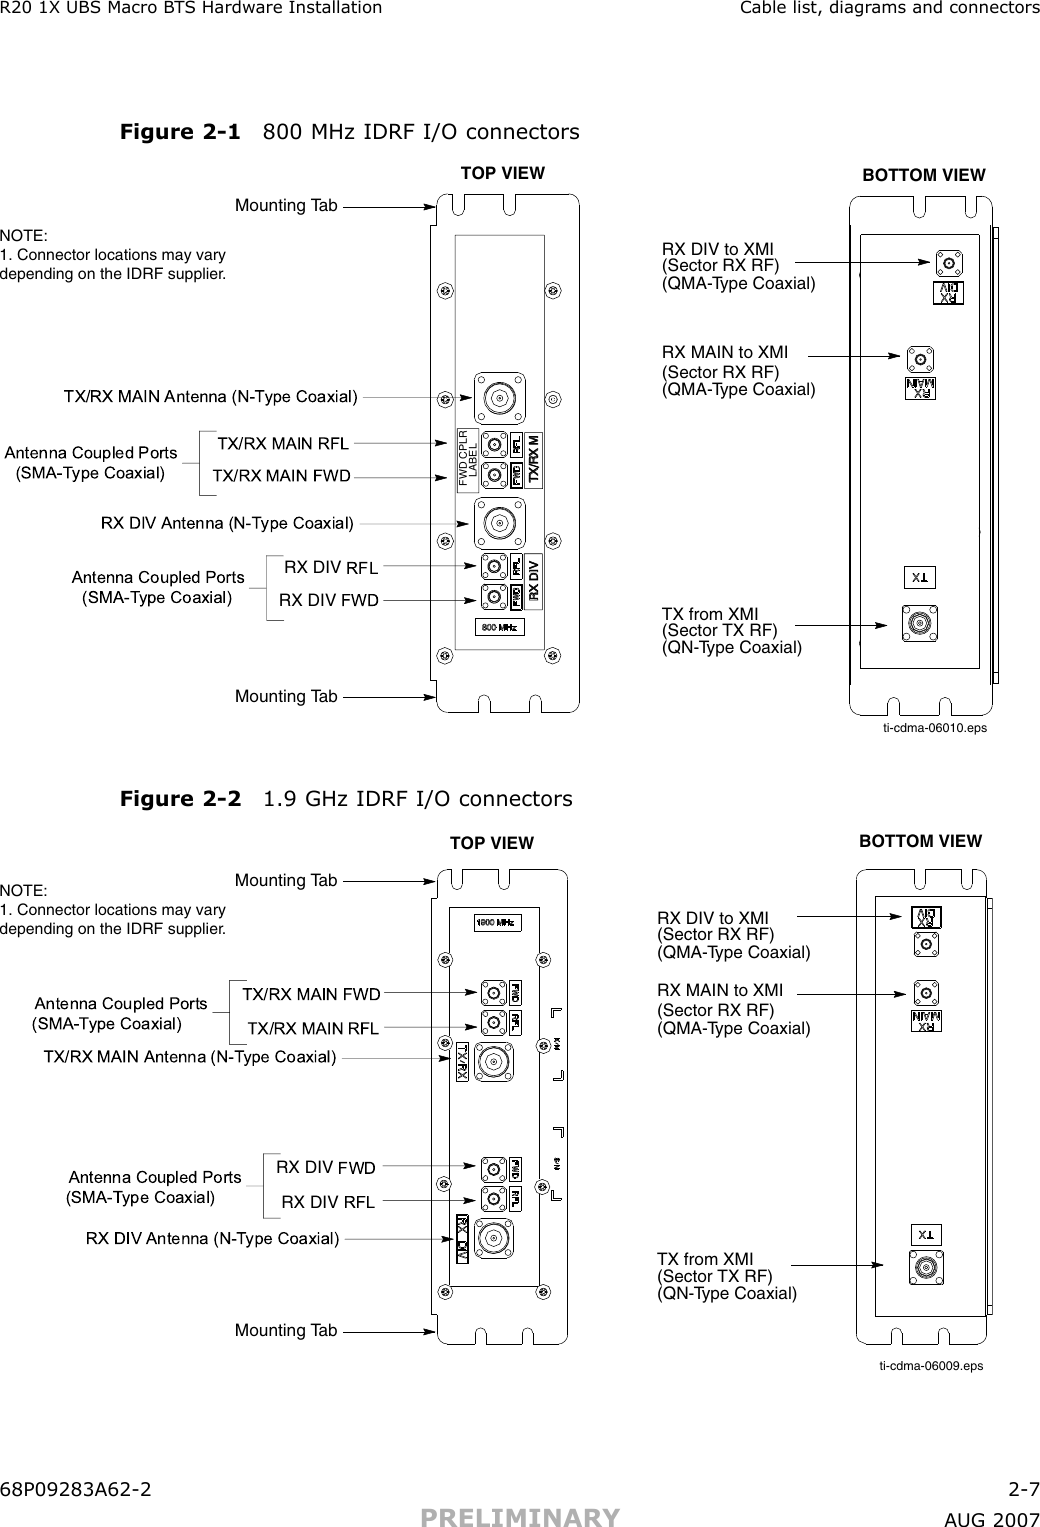 R20 1X UBS Macro B T S Hardw are Installation Cable list, diagr ams and connectorsFigure 2 -1 800 MHz IDRF I/O connectorsTOP VIEW BOTTOM VIEWRX DIV to XMI(QMA-Type Coaxial)TX from XMI (Sector TX RF) (QN-Type Coaxial)RX MAIN to XMI (QMA-Type Coaxial)ti-cdma-06010.epsTX/RX MAIN Antenna (N-T ype Coaxial)Antenna Coupled Ports   (SMA-Type Coaxial)TX/RX MAIN RFLTX/RX MAIN FWDAntenna Coupled Ports   (SMA-Type Coaxial)RX DIV RFLRX DIV FWDRX DIV Antenna (N-T ype Coaxial)(Sector RX RF) (Sector RX RF) TX/RX MRX DIVFWD CPLR   LABELMounting TabMounting TabNOTE:1. Connector locations may vary depending on the IDRF supplier.Figure 2 -2 1.9 GHz IDRF I/O connectorsTOP VIEW BOTTOM VIEWRX DIV to XMI(QMA-Type Coaxial)TX from XMI (Sector TX RF) (QN-Type Coaxial)RX MAIN to XMI (QMA-Type Coaxial)ti-cdma-06009.epsTX/RX MAIN Antenna (N-T ype Coaxial)Antenna Coupled Ports(SMA-Type Coaxial)RX DIV RFLRX DIV FWDAntenna Coupled Ports(SMA-Type Coaxial) TX/RX MAIN RFLTX/RX MAIN FWDRX DIV Antenna (N-T ype Coaxial)Mounting Tab(Sector RX RF) (Sector RX RF) Mounting TabNOTE:1. Connector locations may vary depending on the IDRF supplier.68P09283A62 -2 2 -7PRELIMINARY A UG 2007